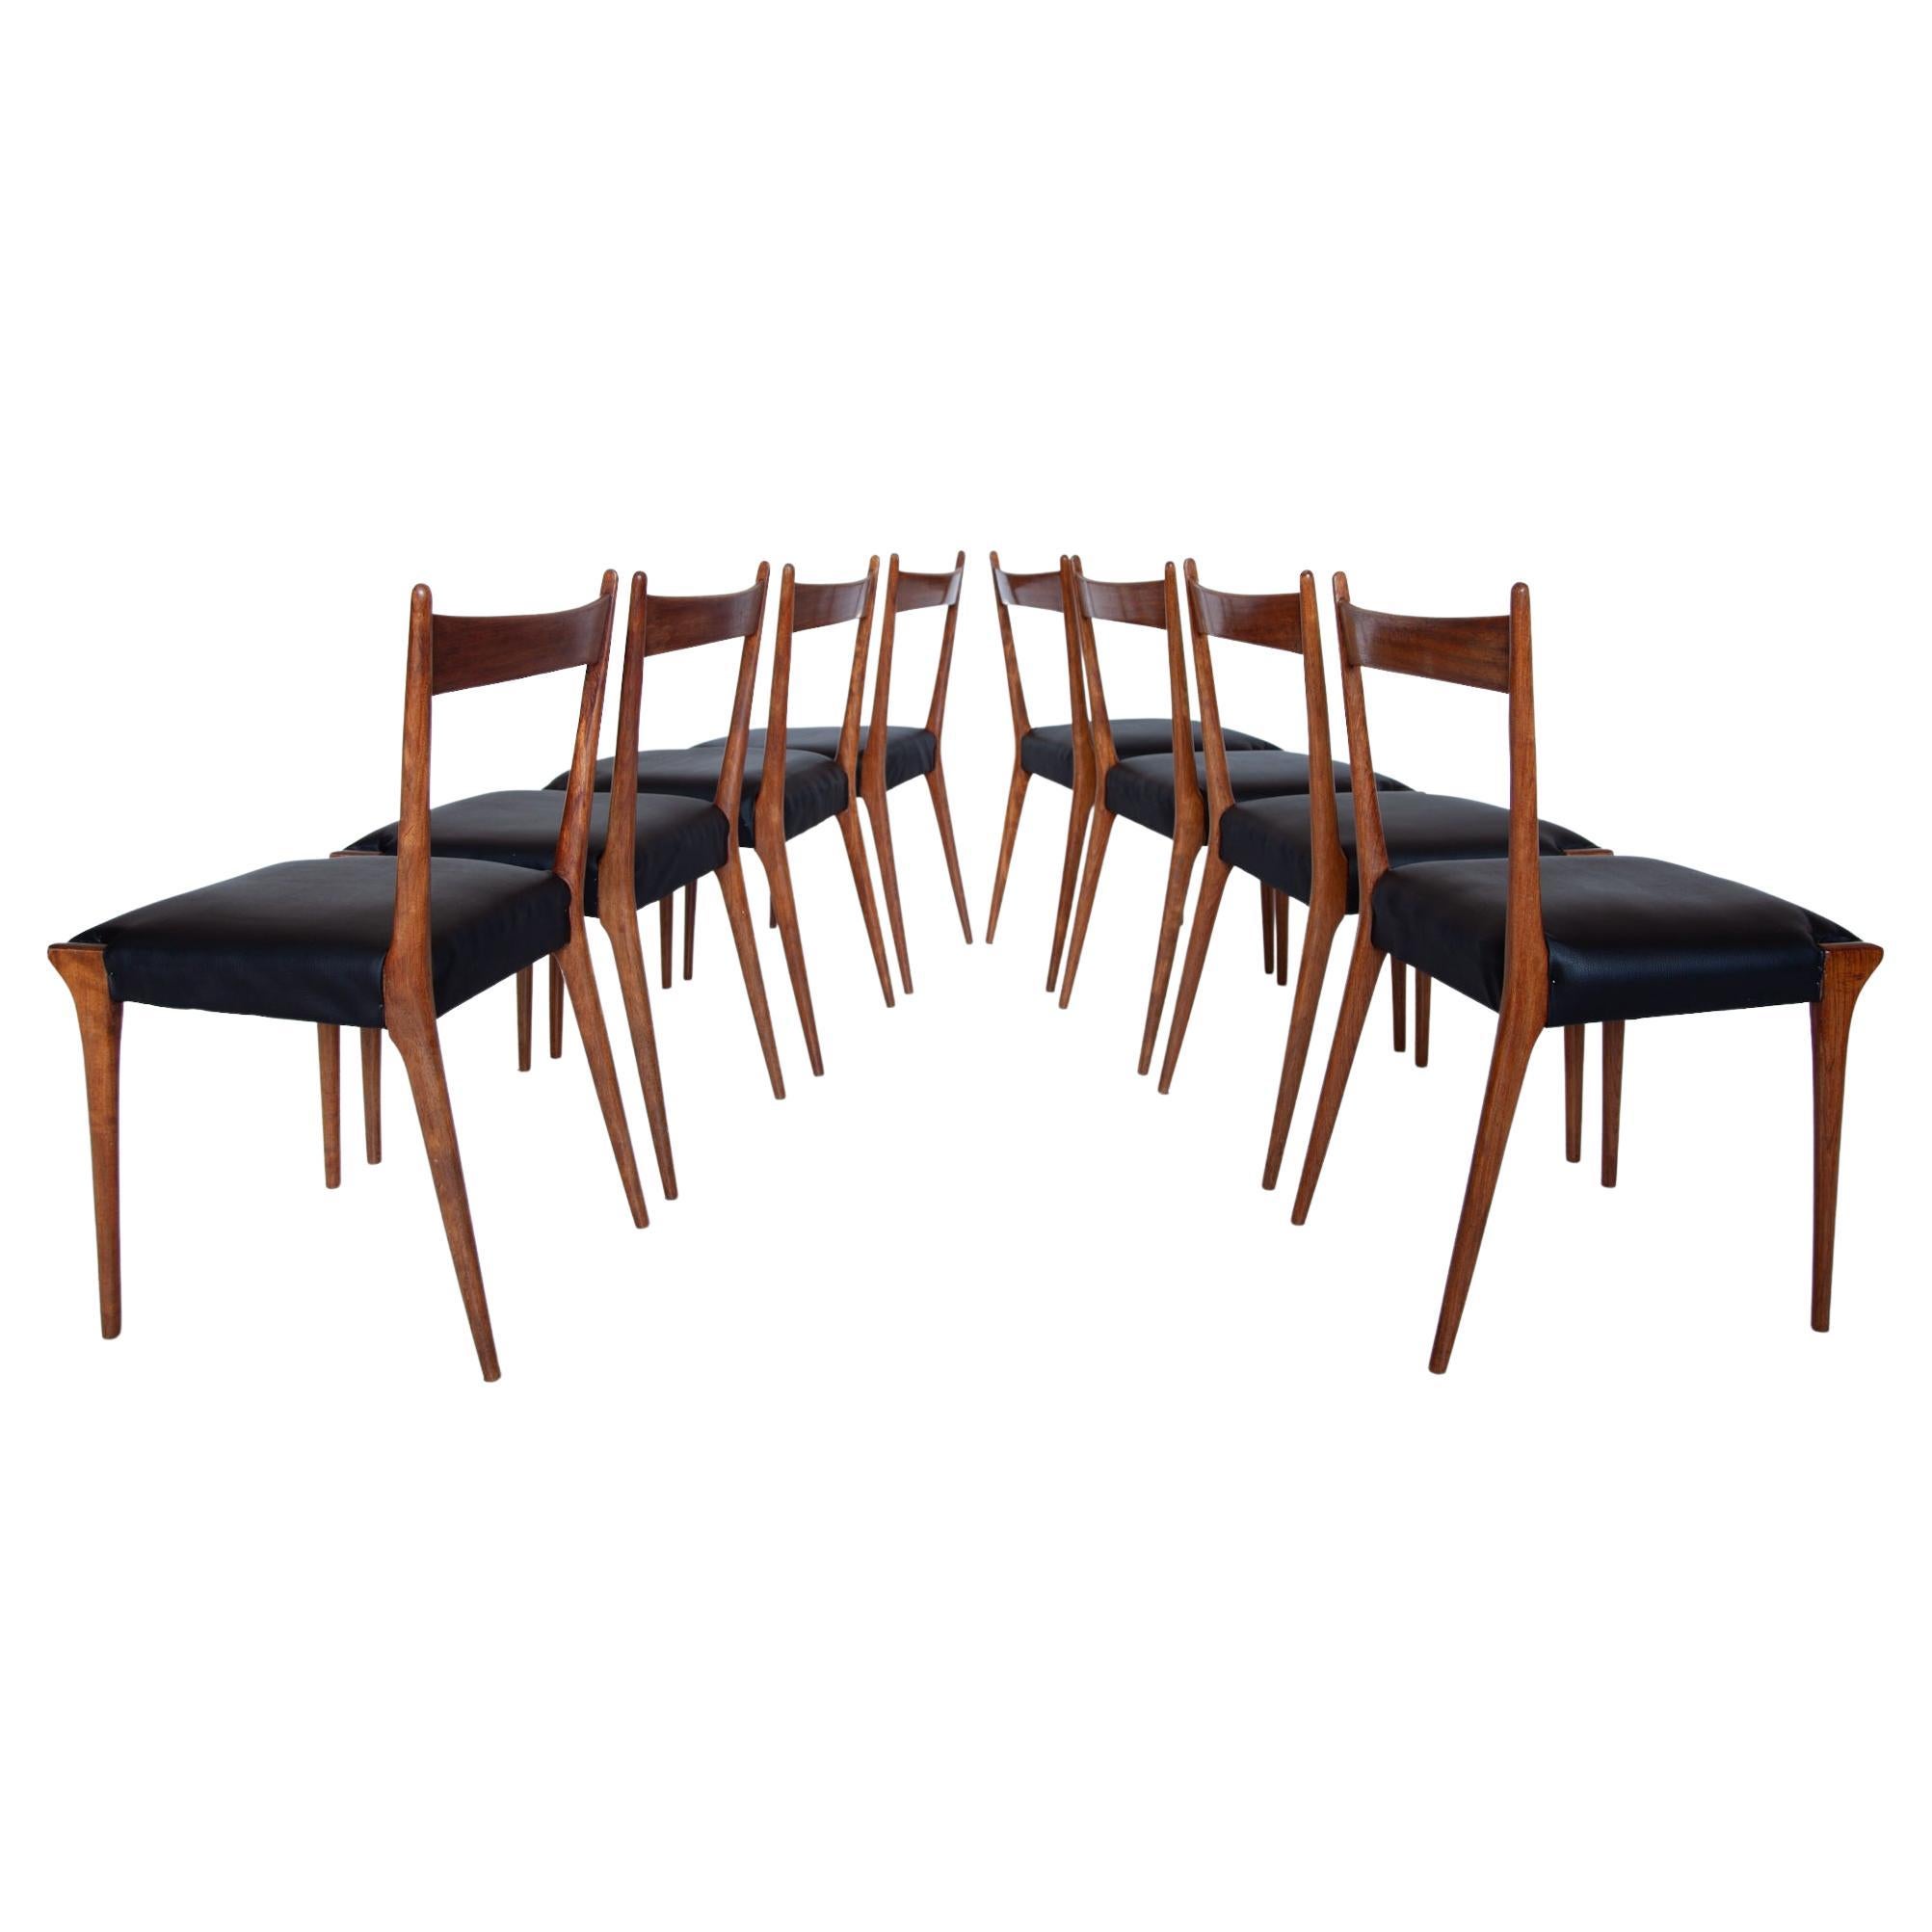 Set of Eight Dining Chairs 1958, Belgium for Belform designed by Alfred Hendrickx